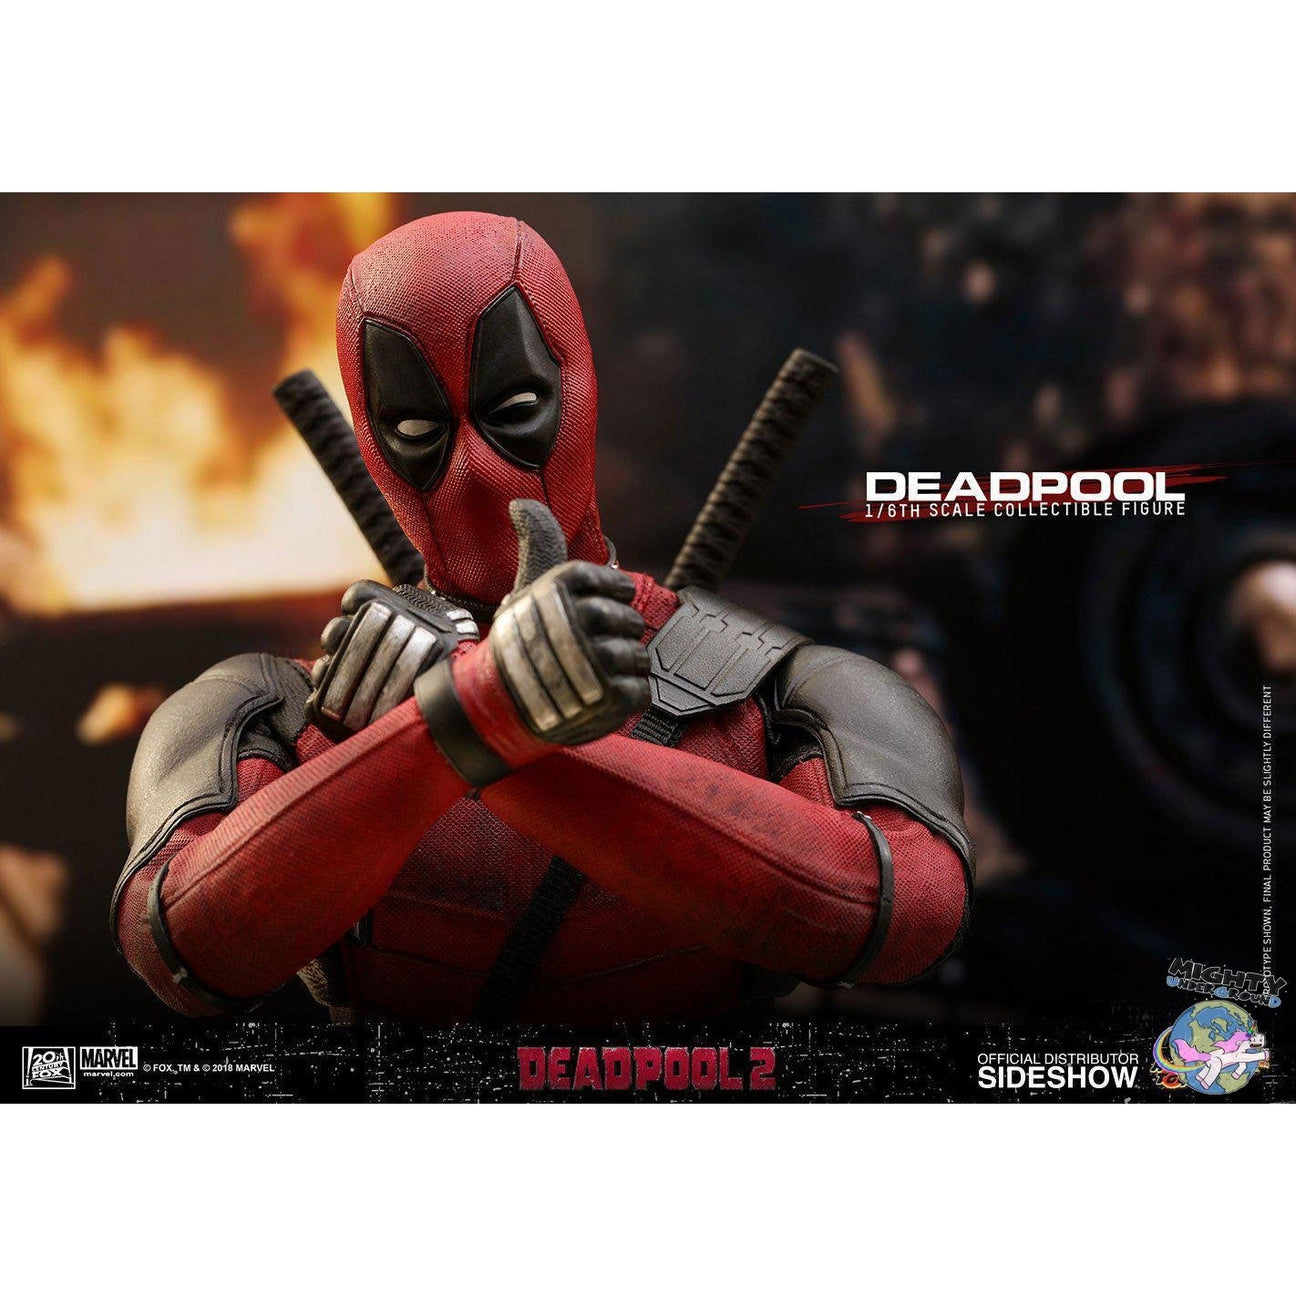 Deadpool Sideshow Toys 12 Inch Figure Unboxing Review Deadpool Movie  Trailer 2015 Marvel Toys - YouTube